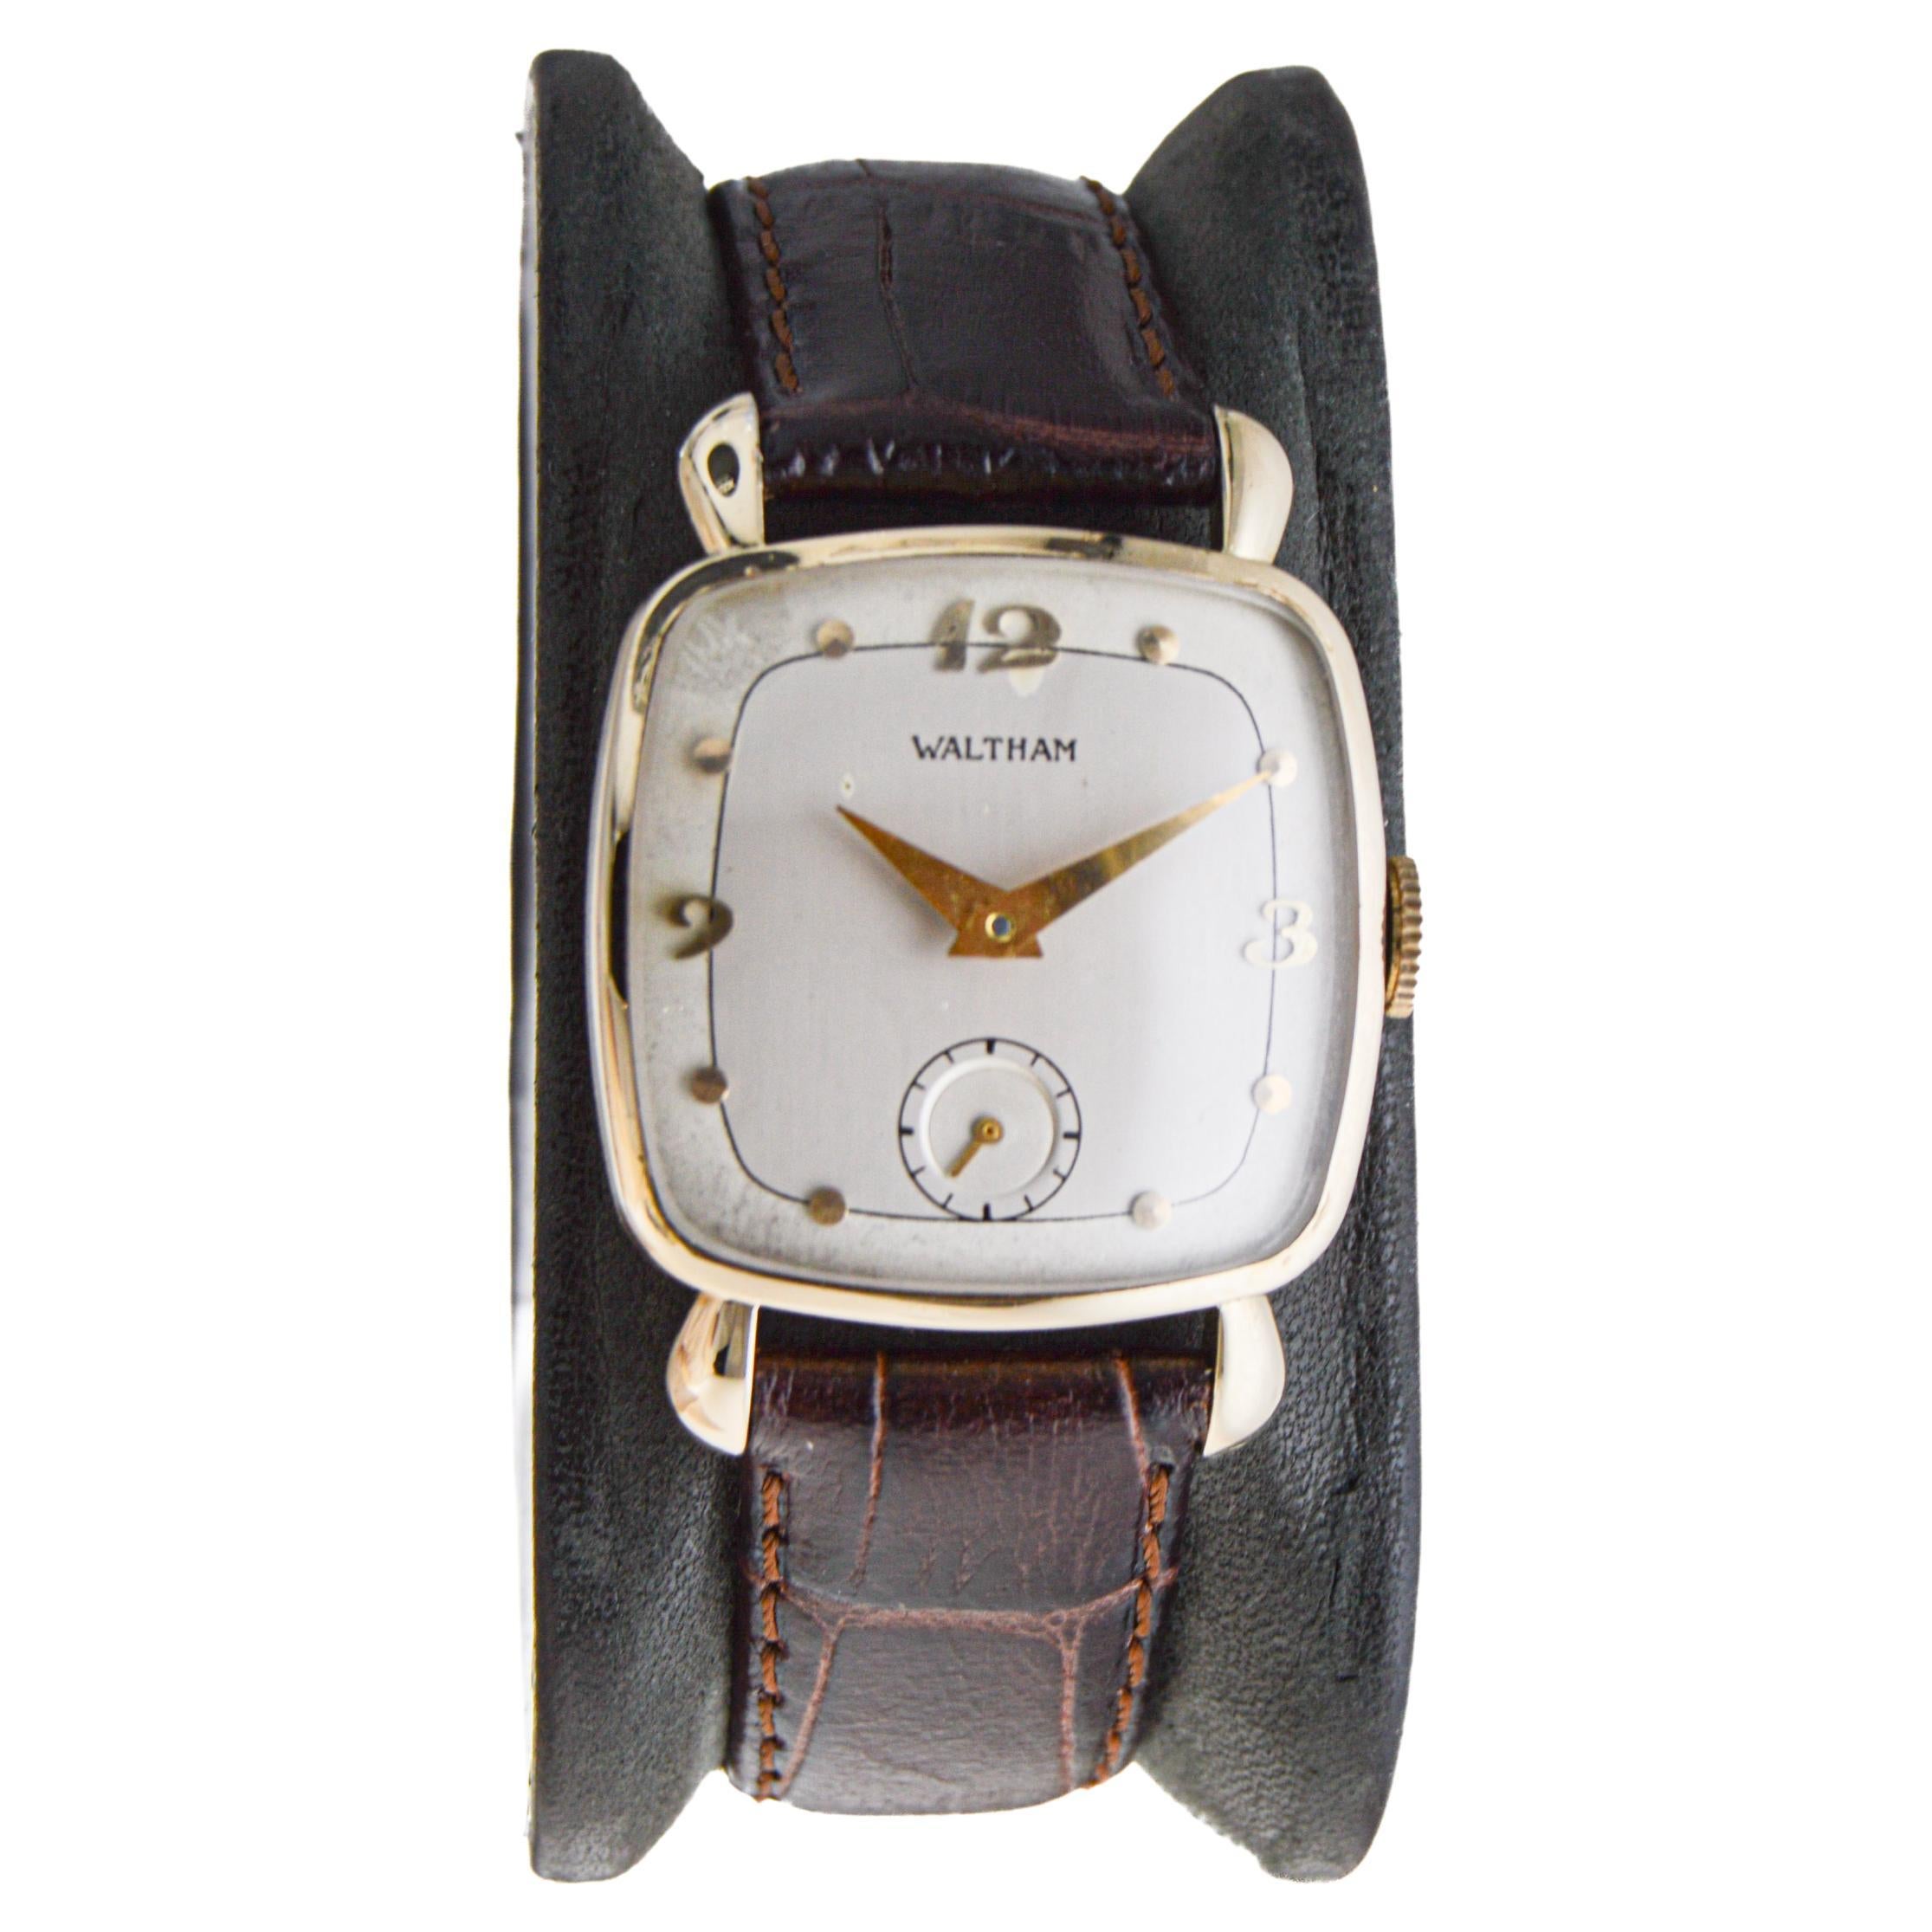 Waltham Gold Filled Art Deco Cushion Shaped Watch with Original Dial from 1940's For Sale